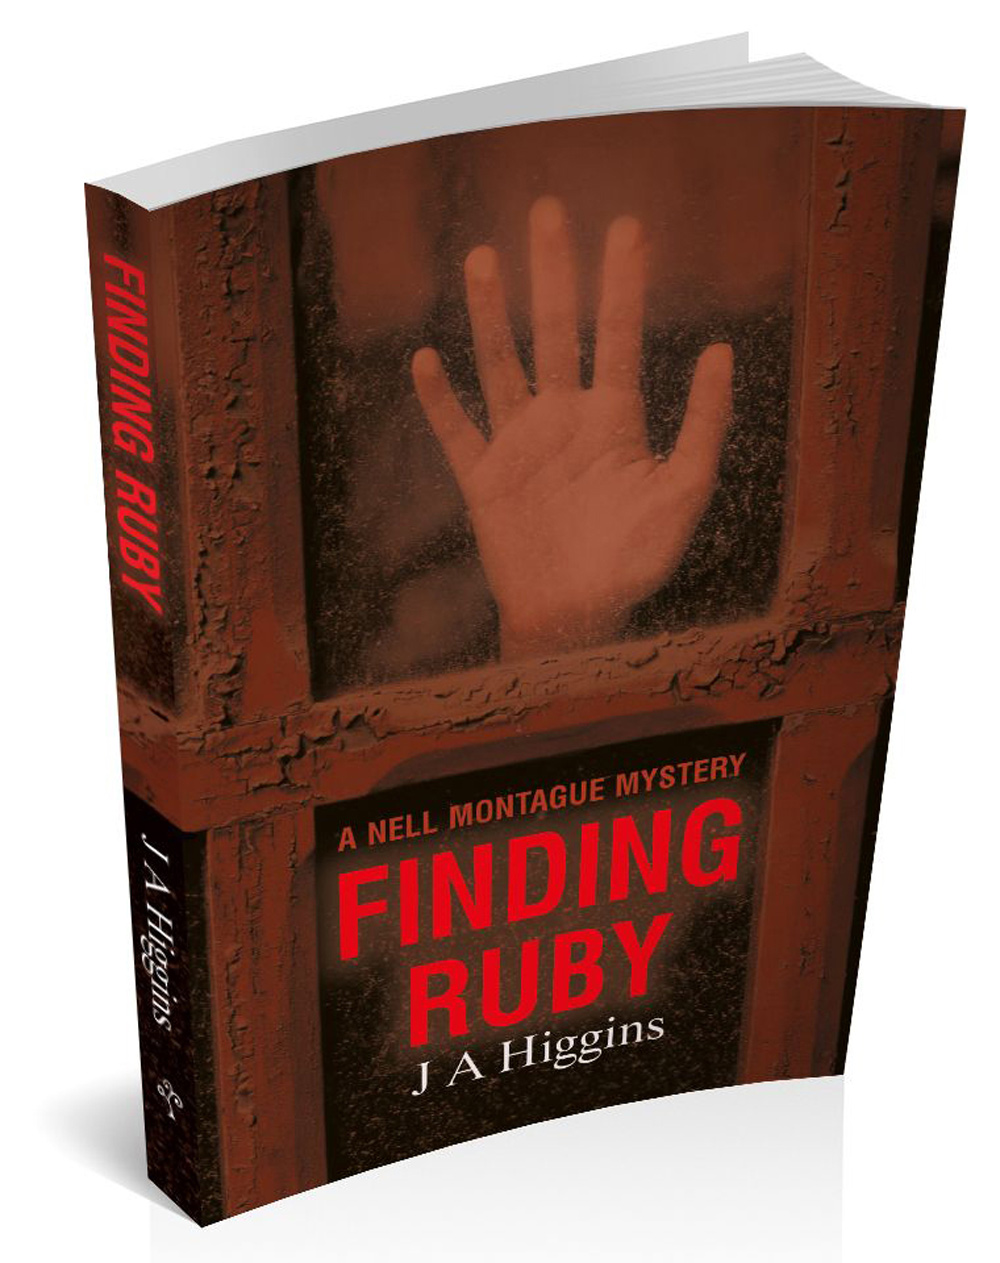 Finding Ruby, one of the author’s books